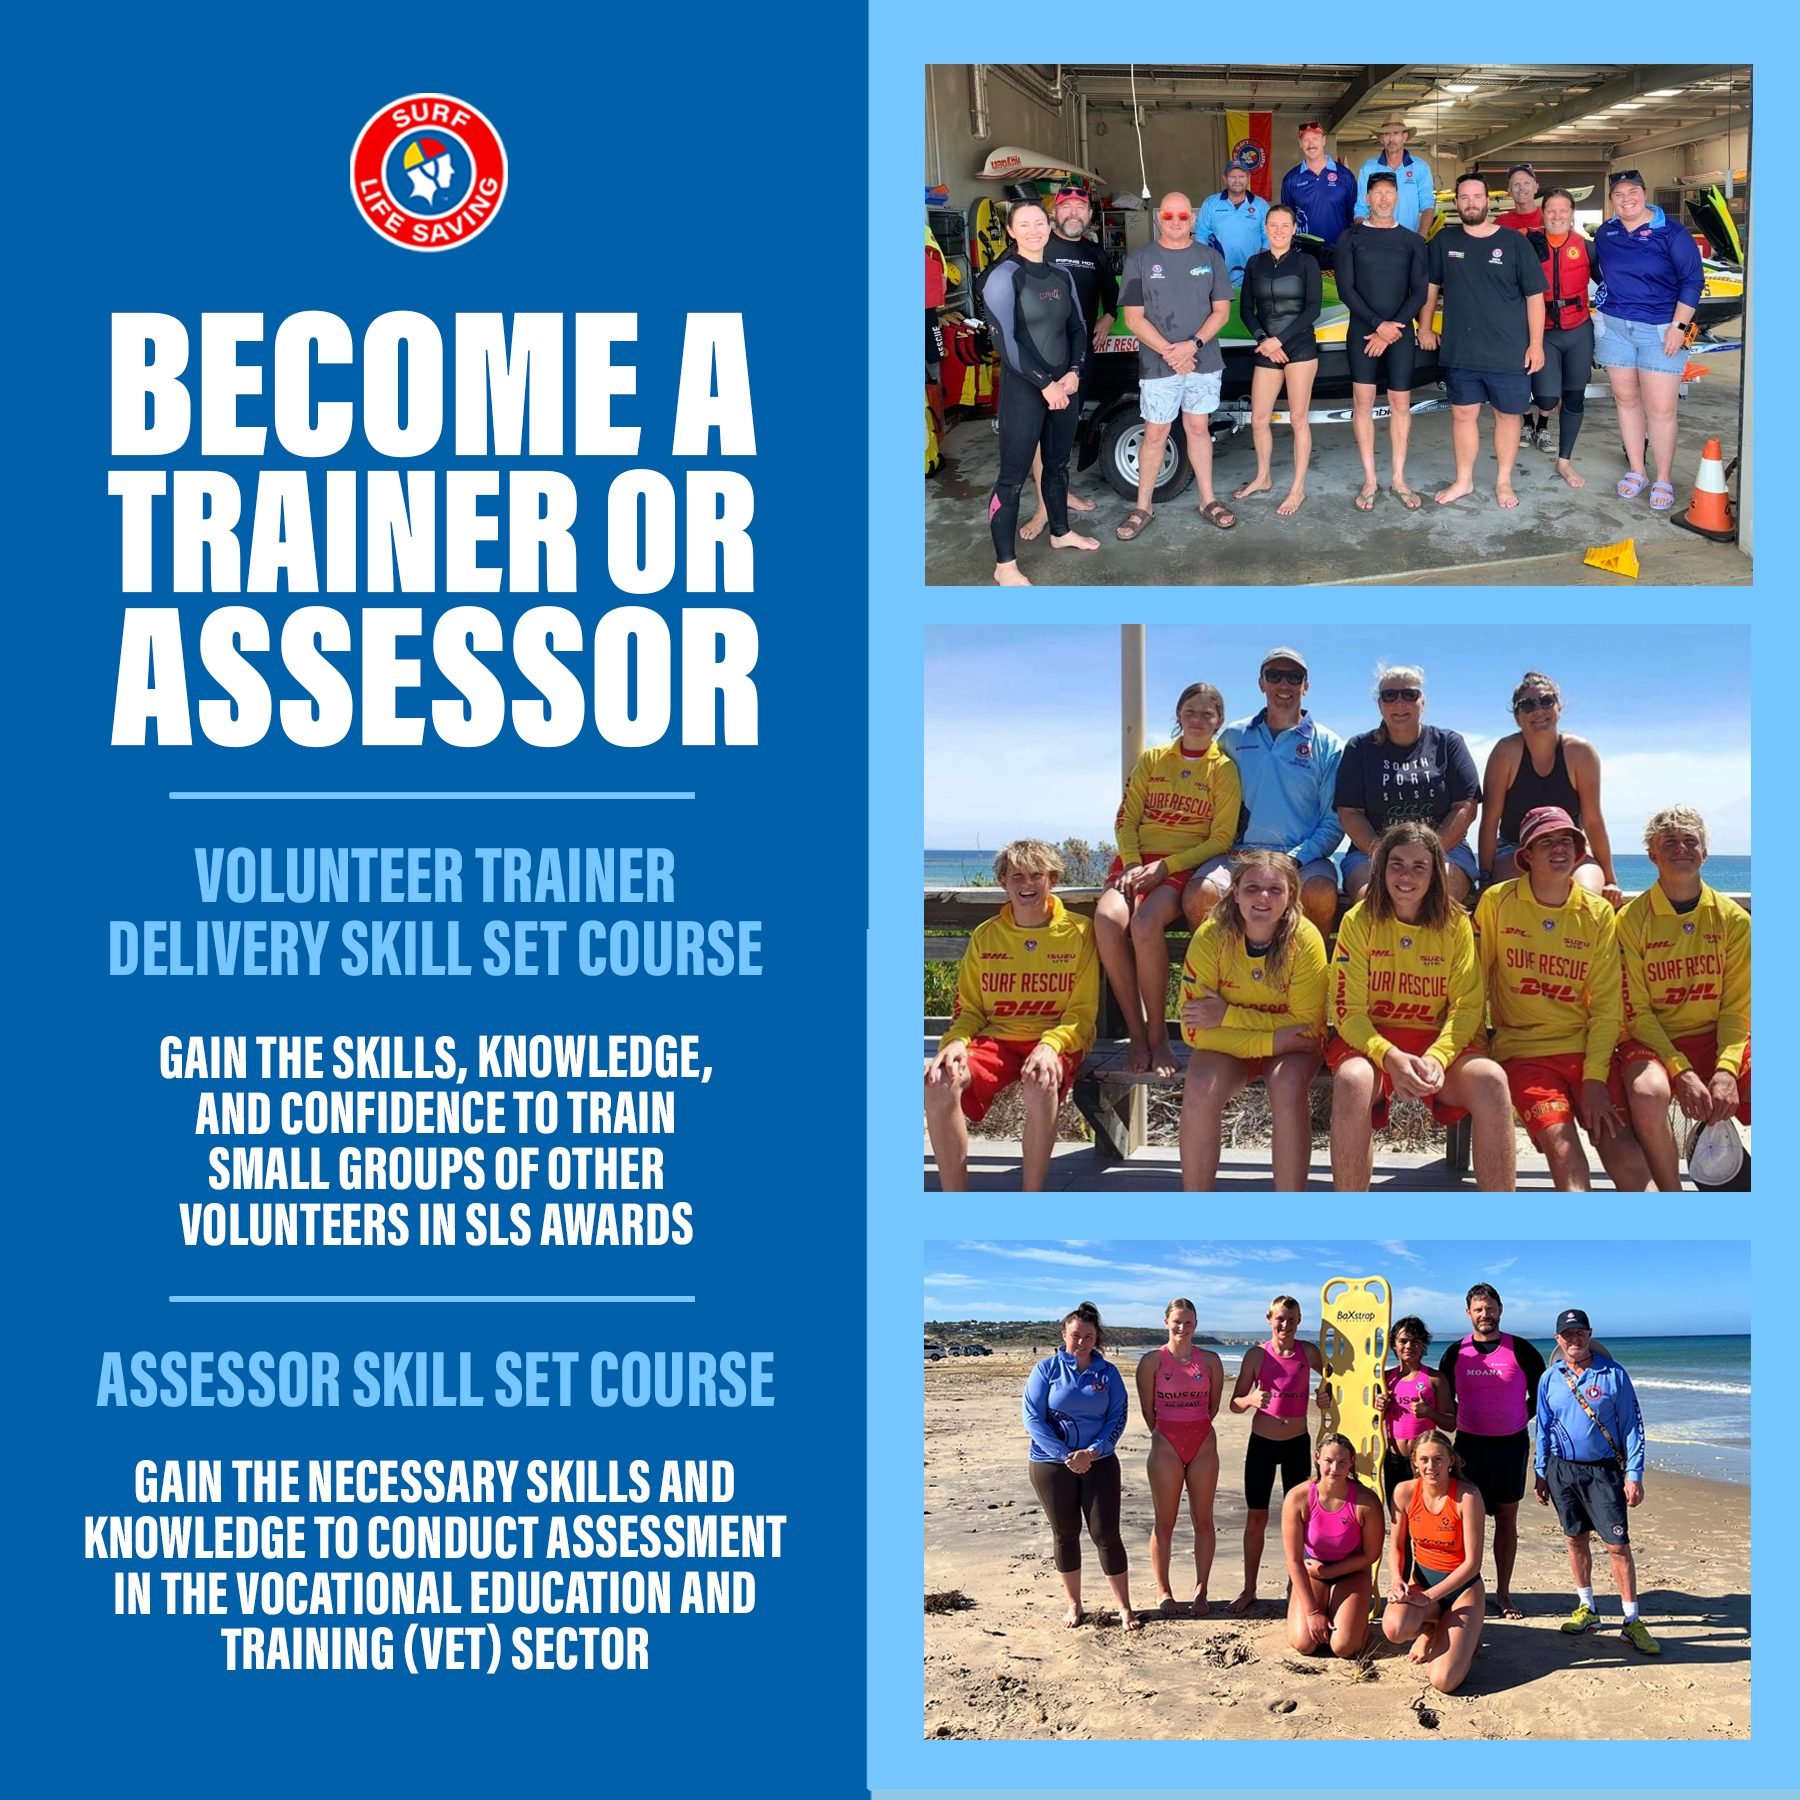 🔴PAVE THE WAY FOR FUTURE SURF LIFESAVERS 🟡

Within SA, there are over 106 trainers, assessors and facilitators who play a vital role in the growth of our movement by supporting our members to gain their qualifications and develop the skills require